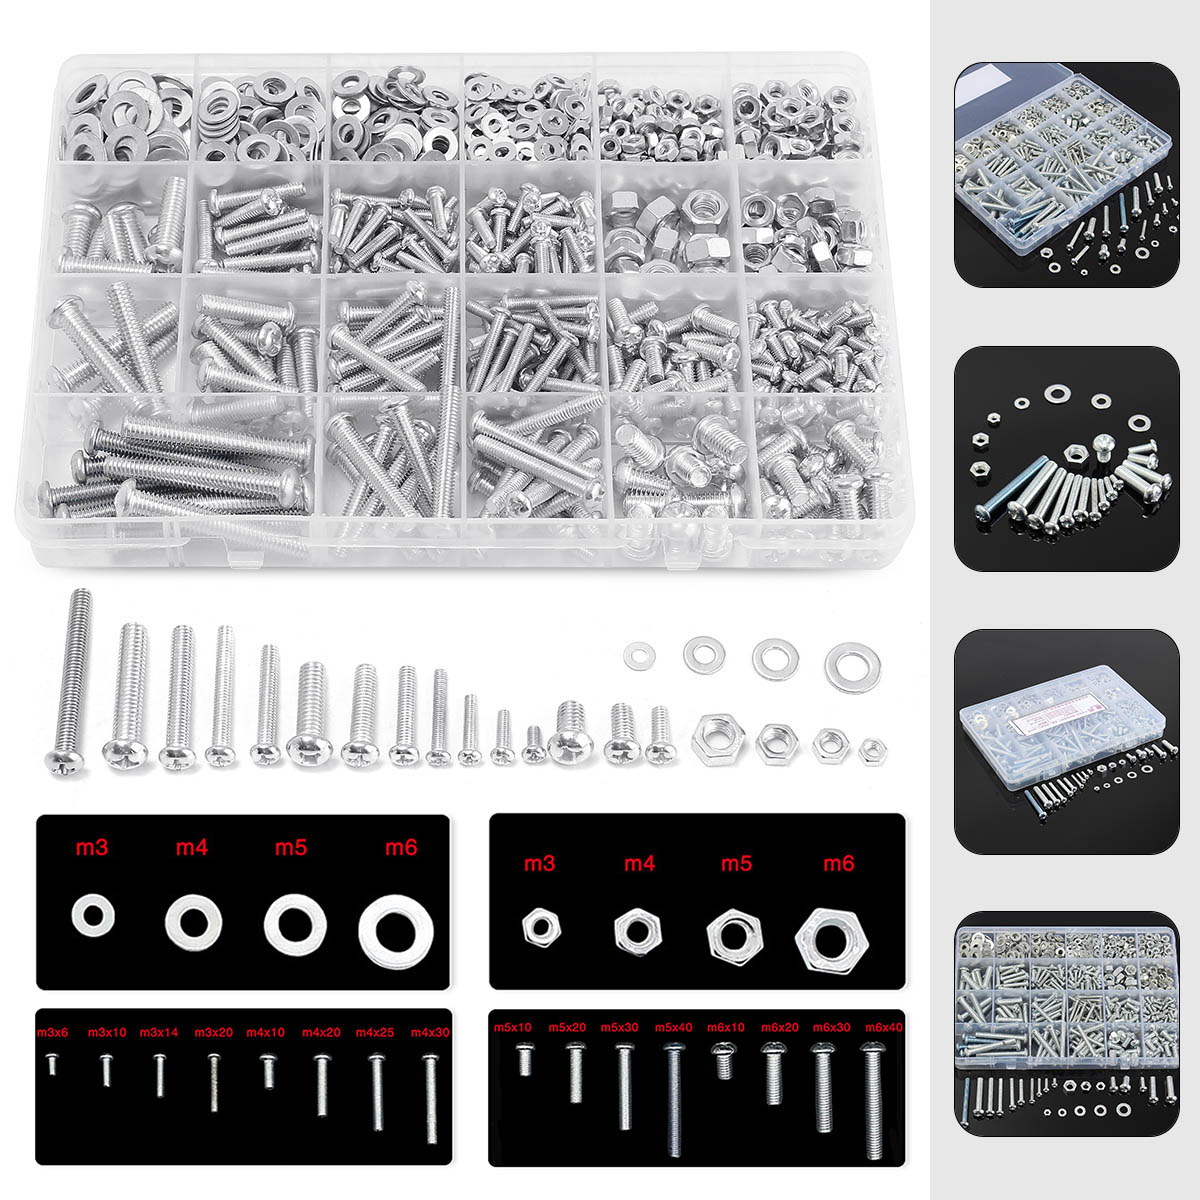 M3-M4-M5-M6-Stainless-Steel-Phillips-Round-Head-Screws-Nuts-Flat-Washers-Assortment-Kit-900g-1194476-2